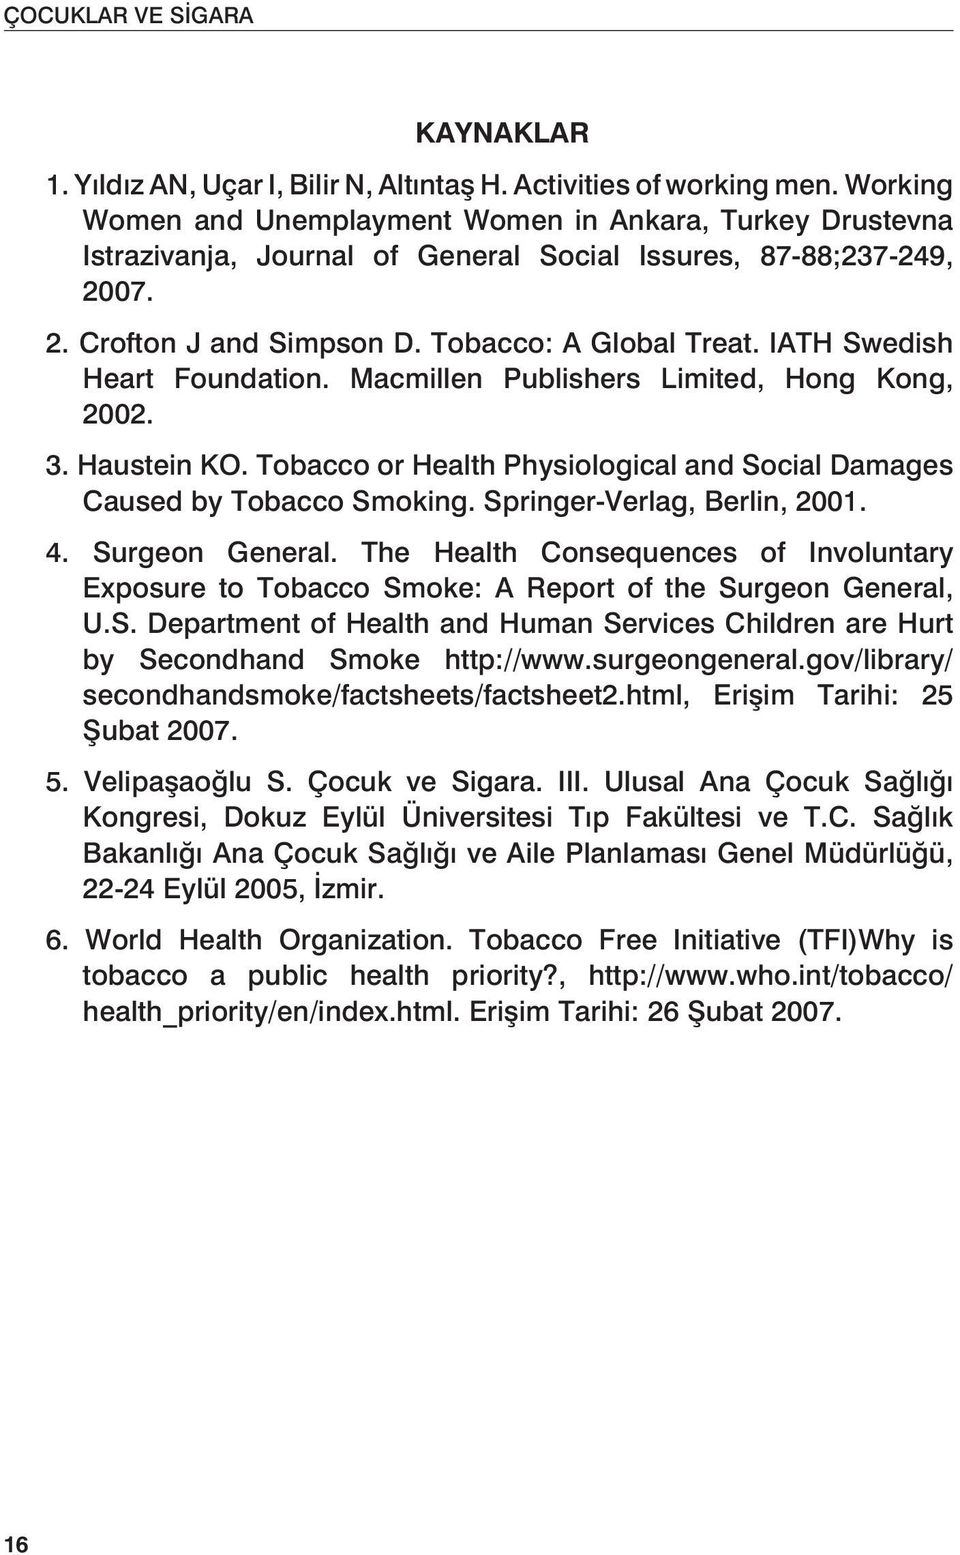 IATH Swedish Heart Foundation. Macmillen Publishers Limited, Hong Kong, 2002. 3. Haustein KO. Tobacco or Health Physiological and Social Damages Caused by Tobacco Smoking.